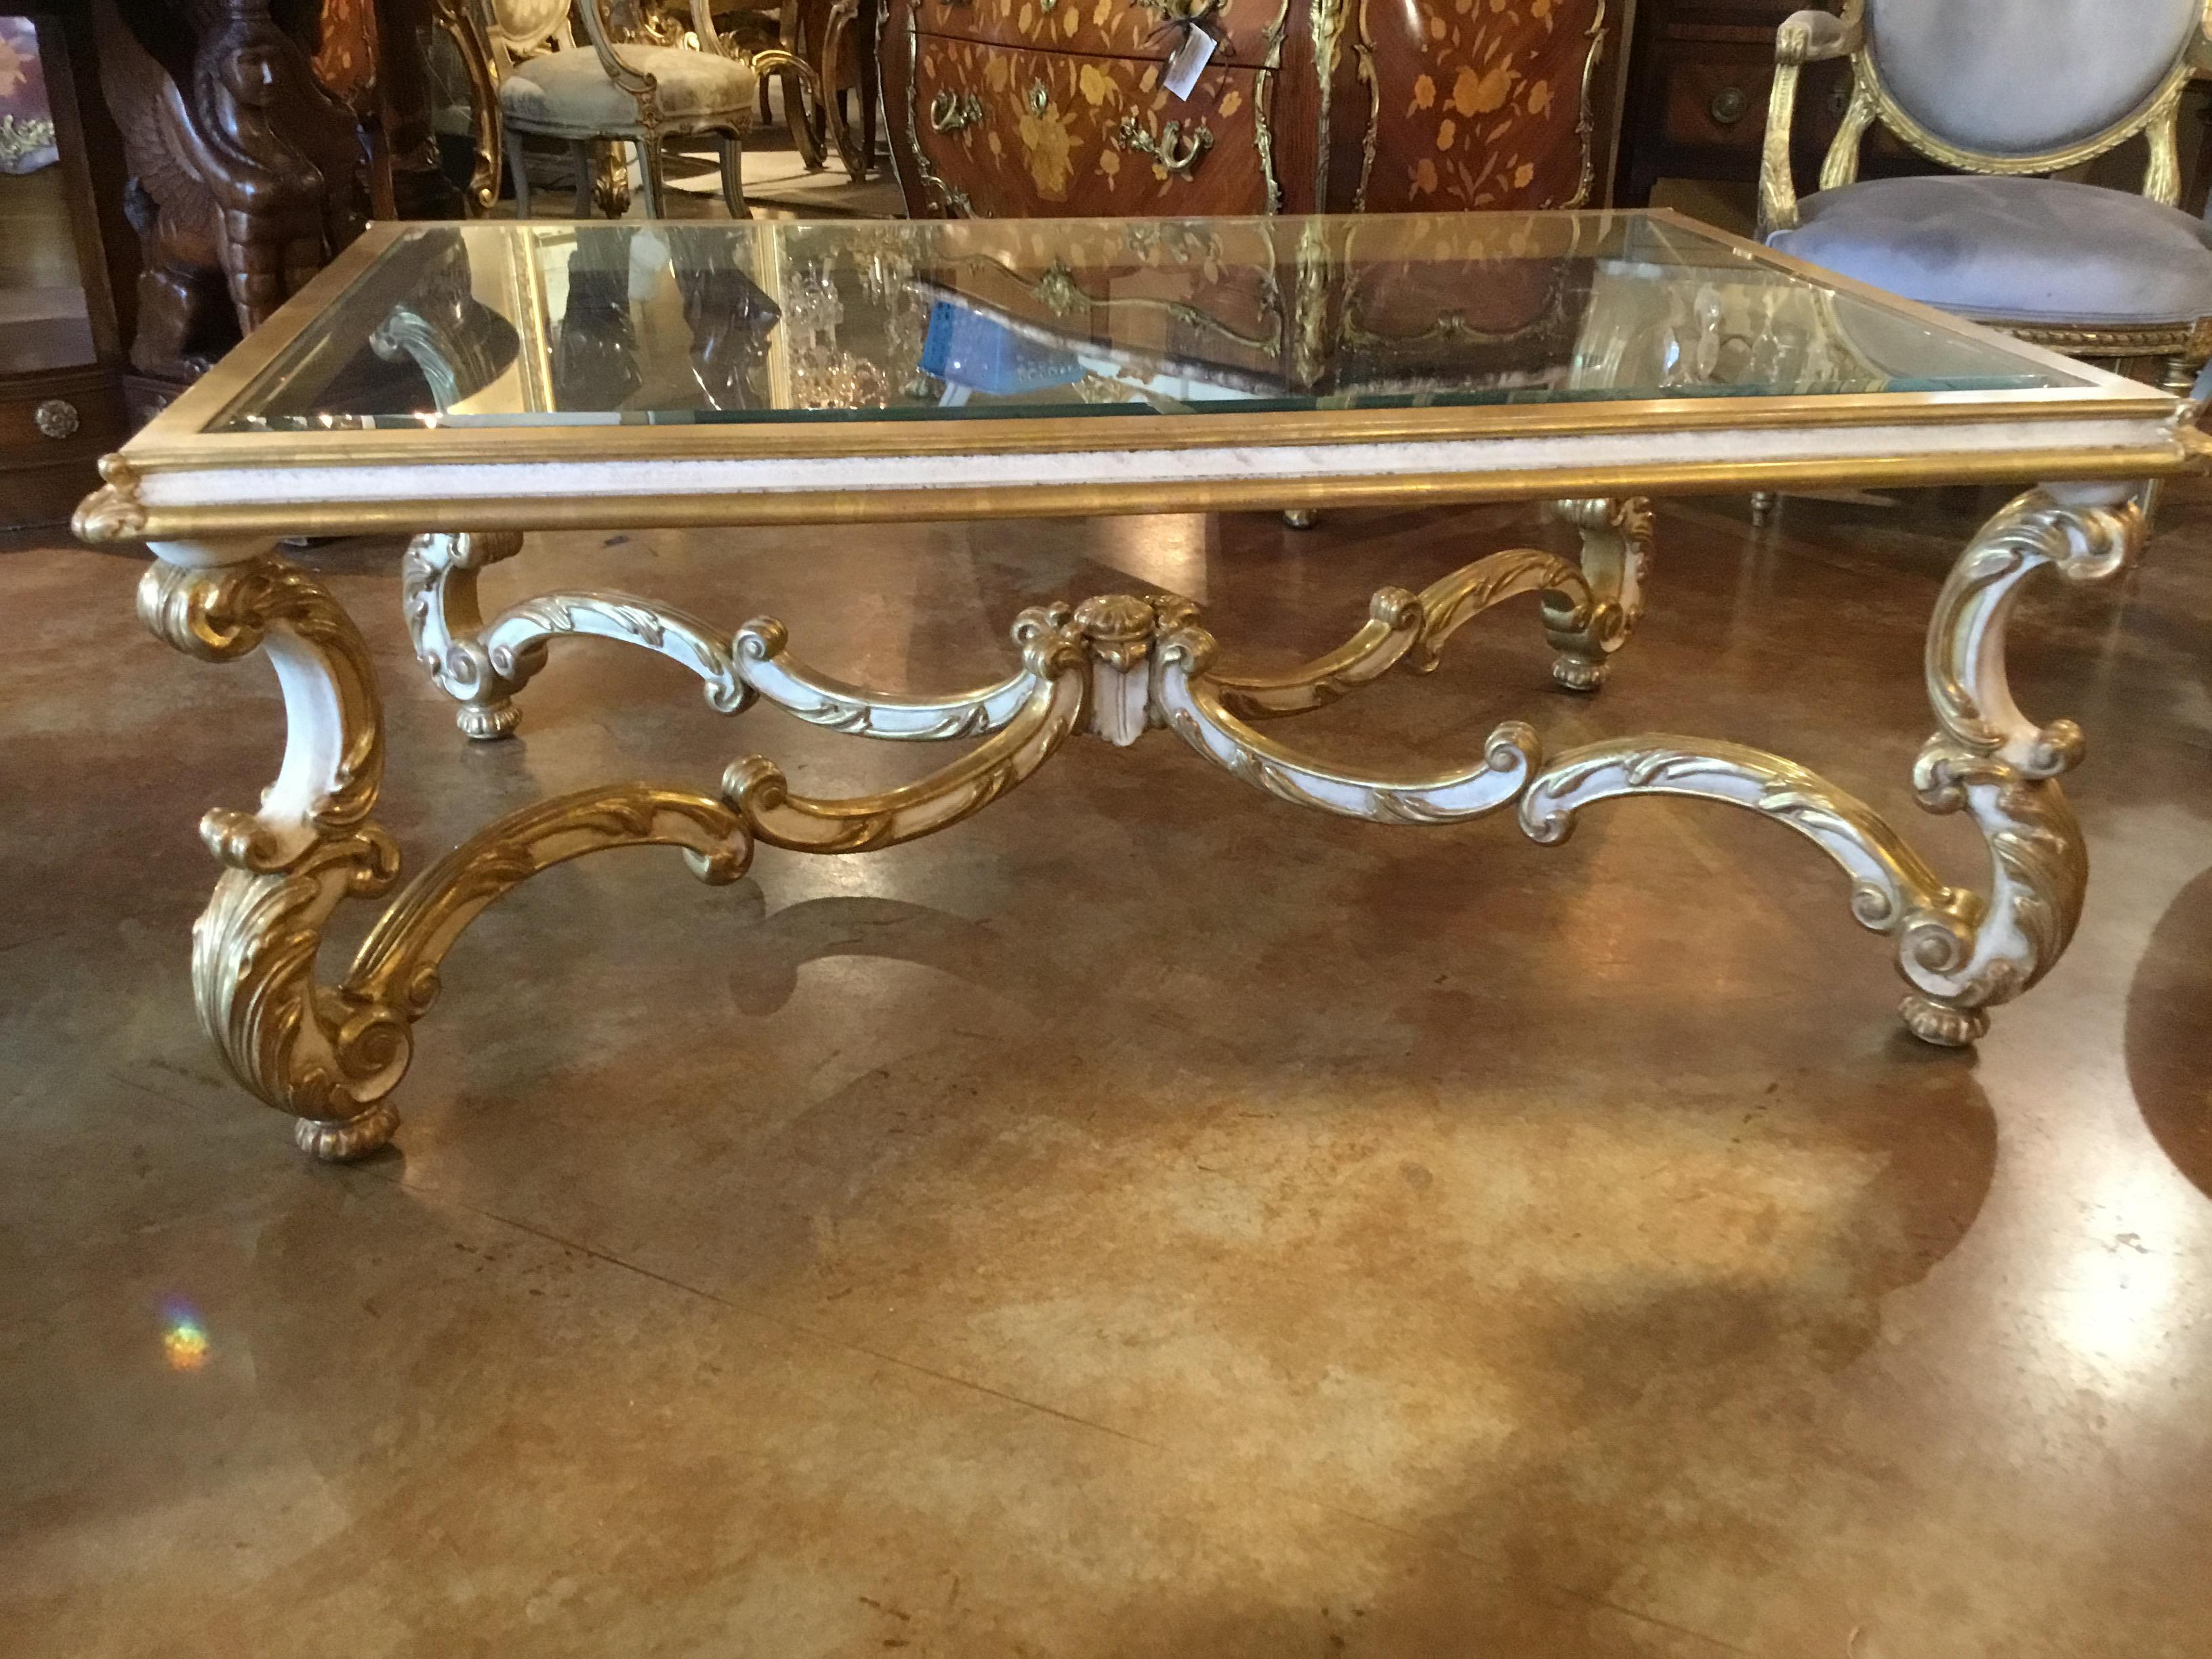 French Louis XV style cocktail table in giltwood and cream paint.
Whorl foot and curved leg support beveled glass.